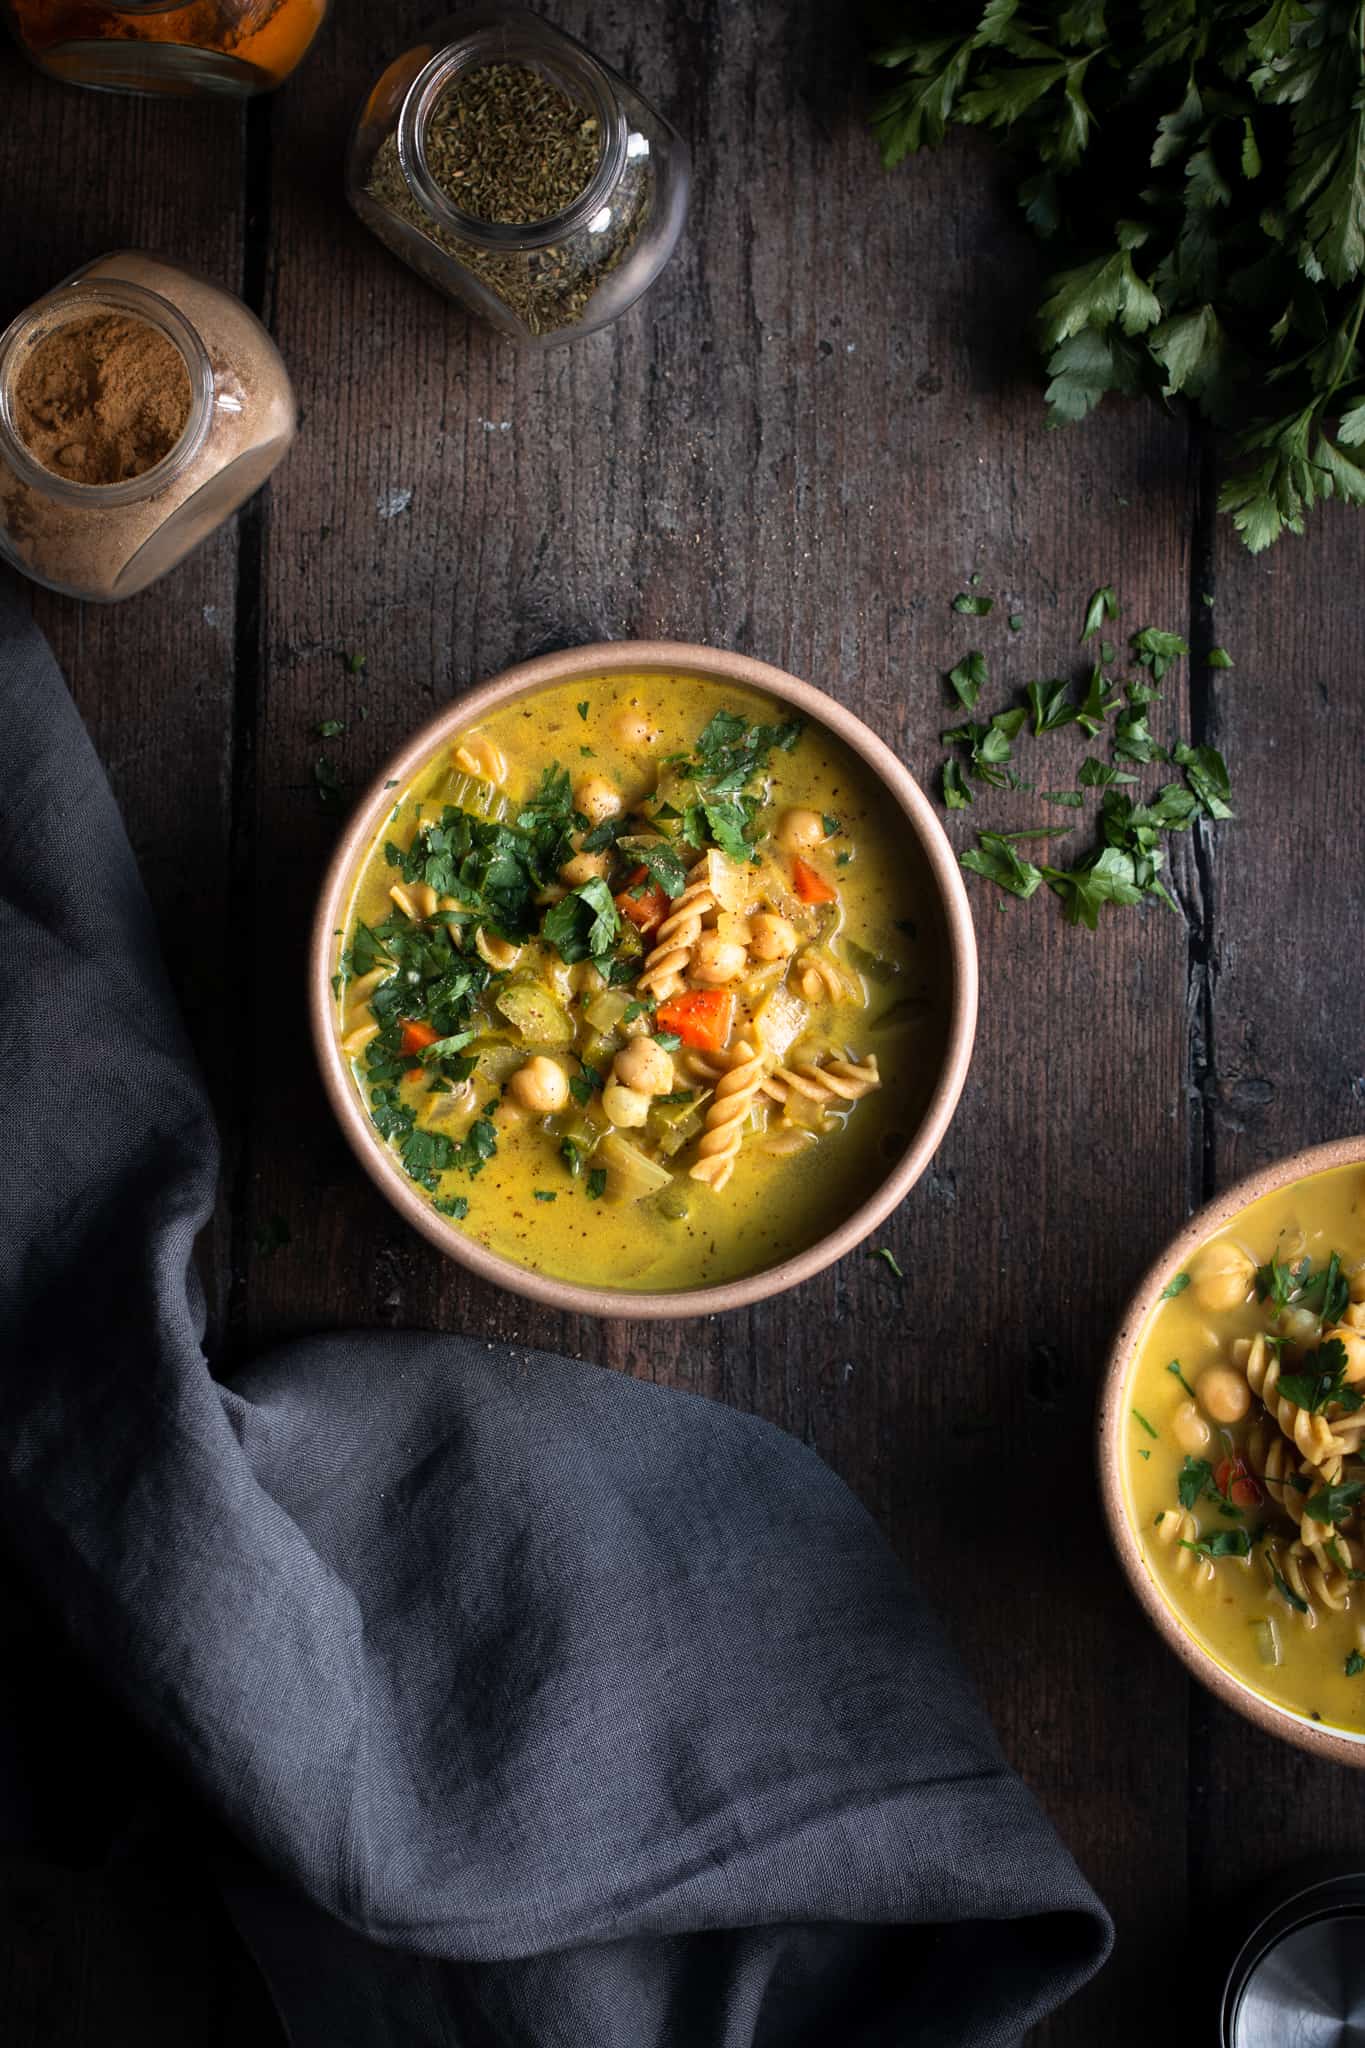 Top 10 Recipes of 2021 - chickpea noodle soup